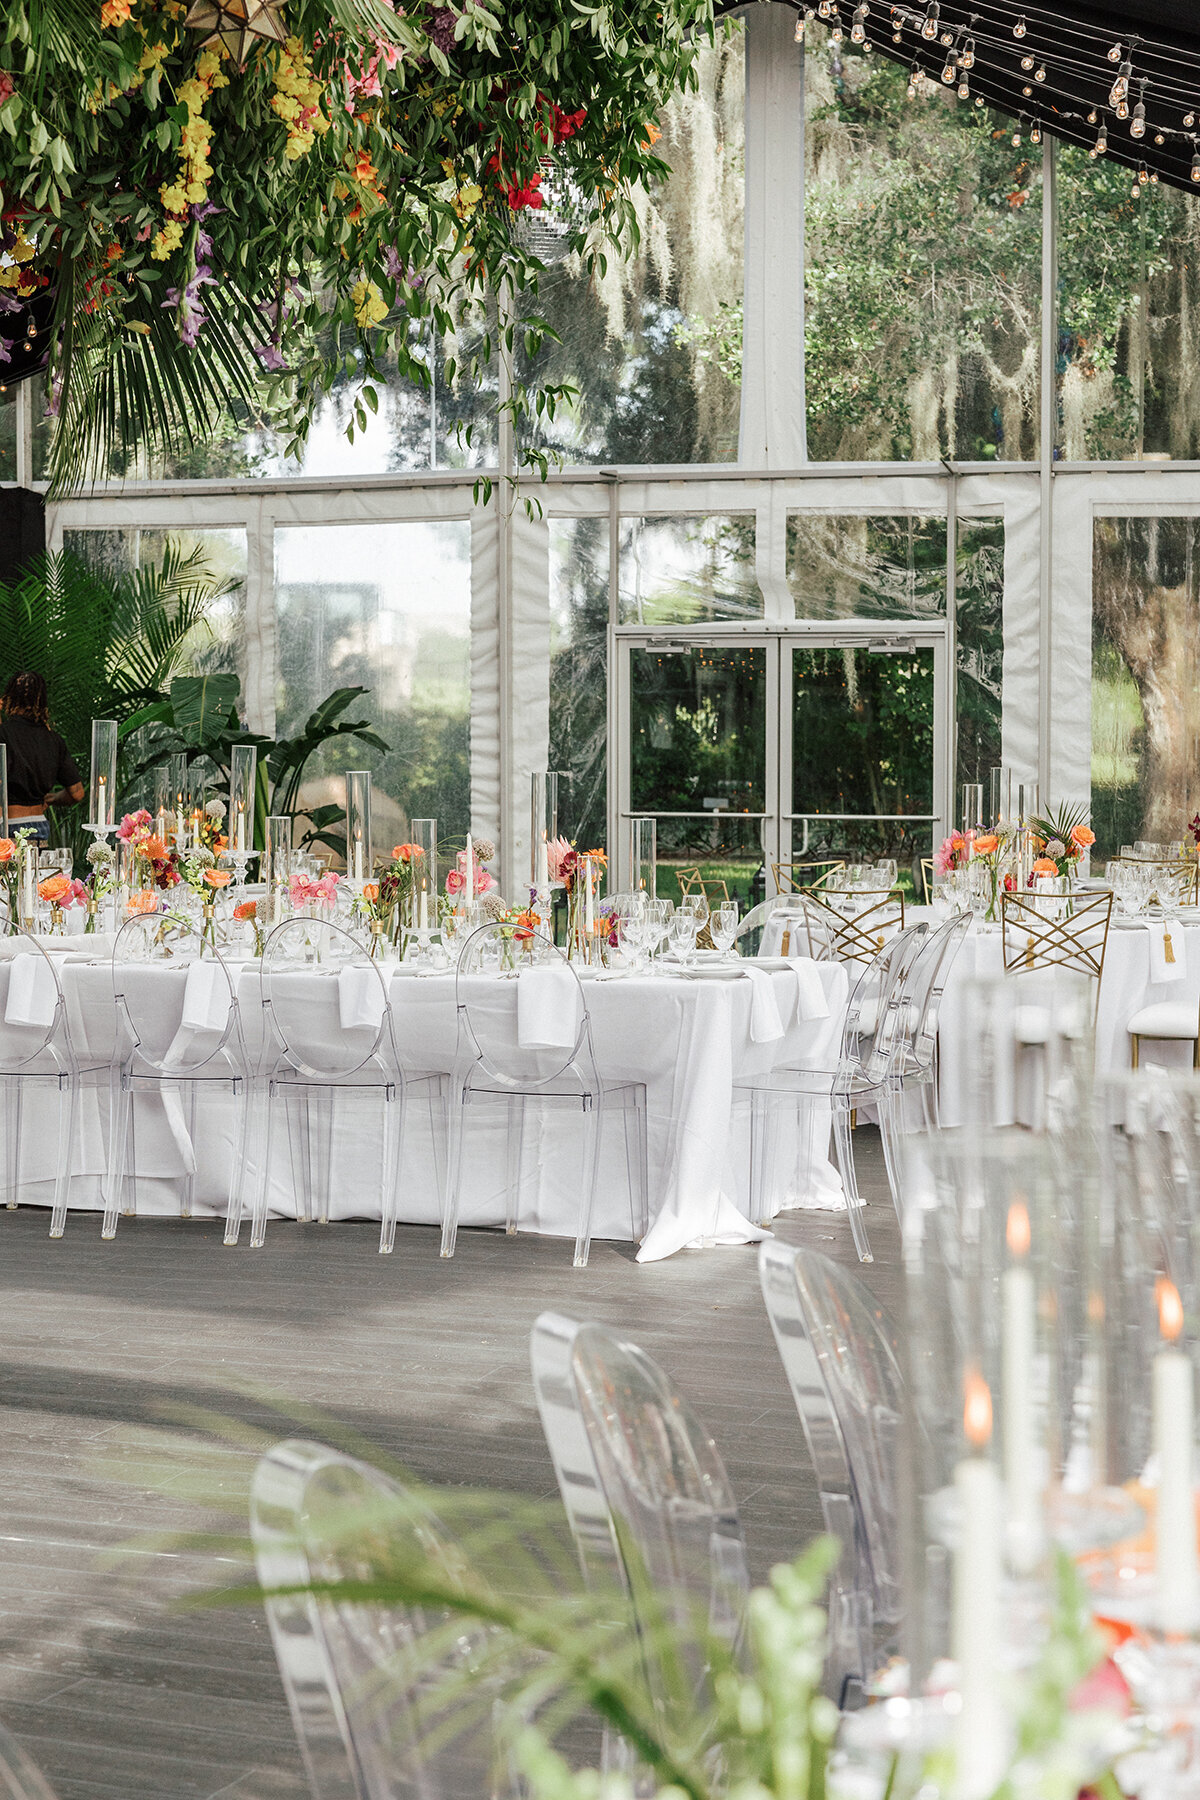 Sumner + Scott - New Orleans Museum of Art Wedding - Luxury Event Planning by Michelle Norwood - 30